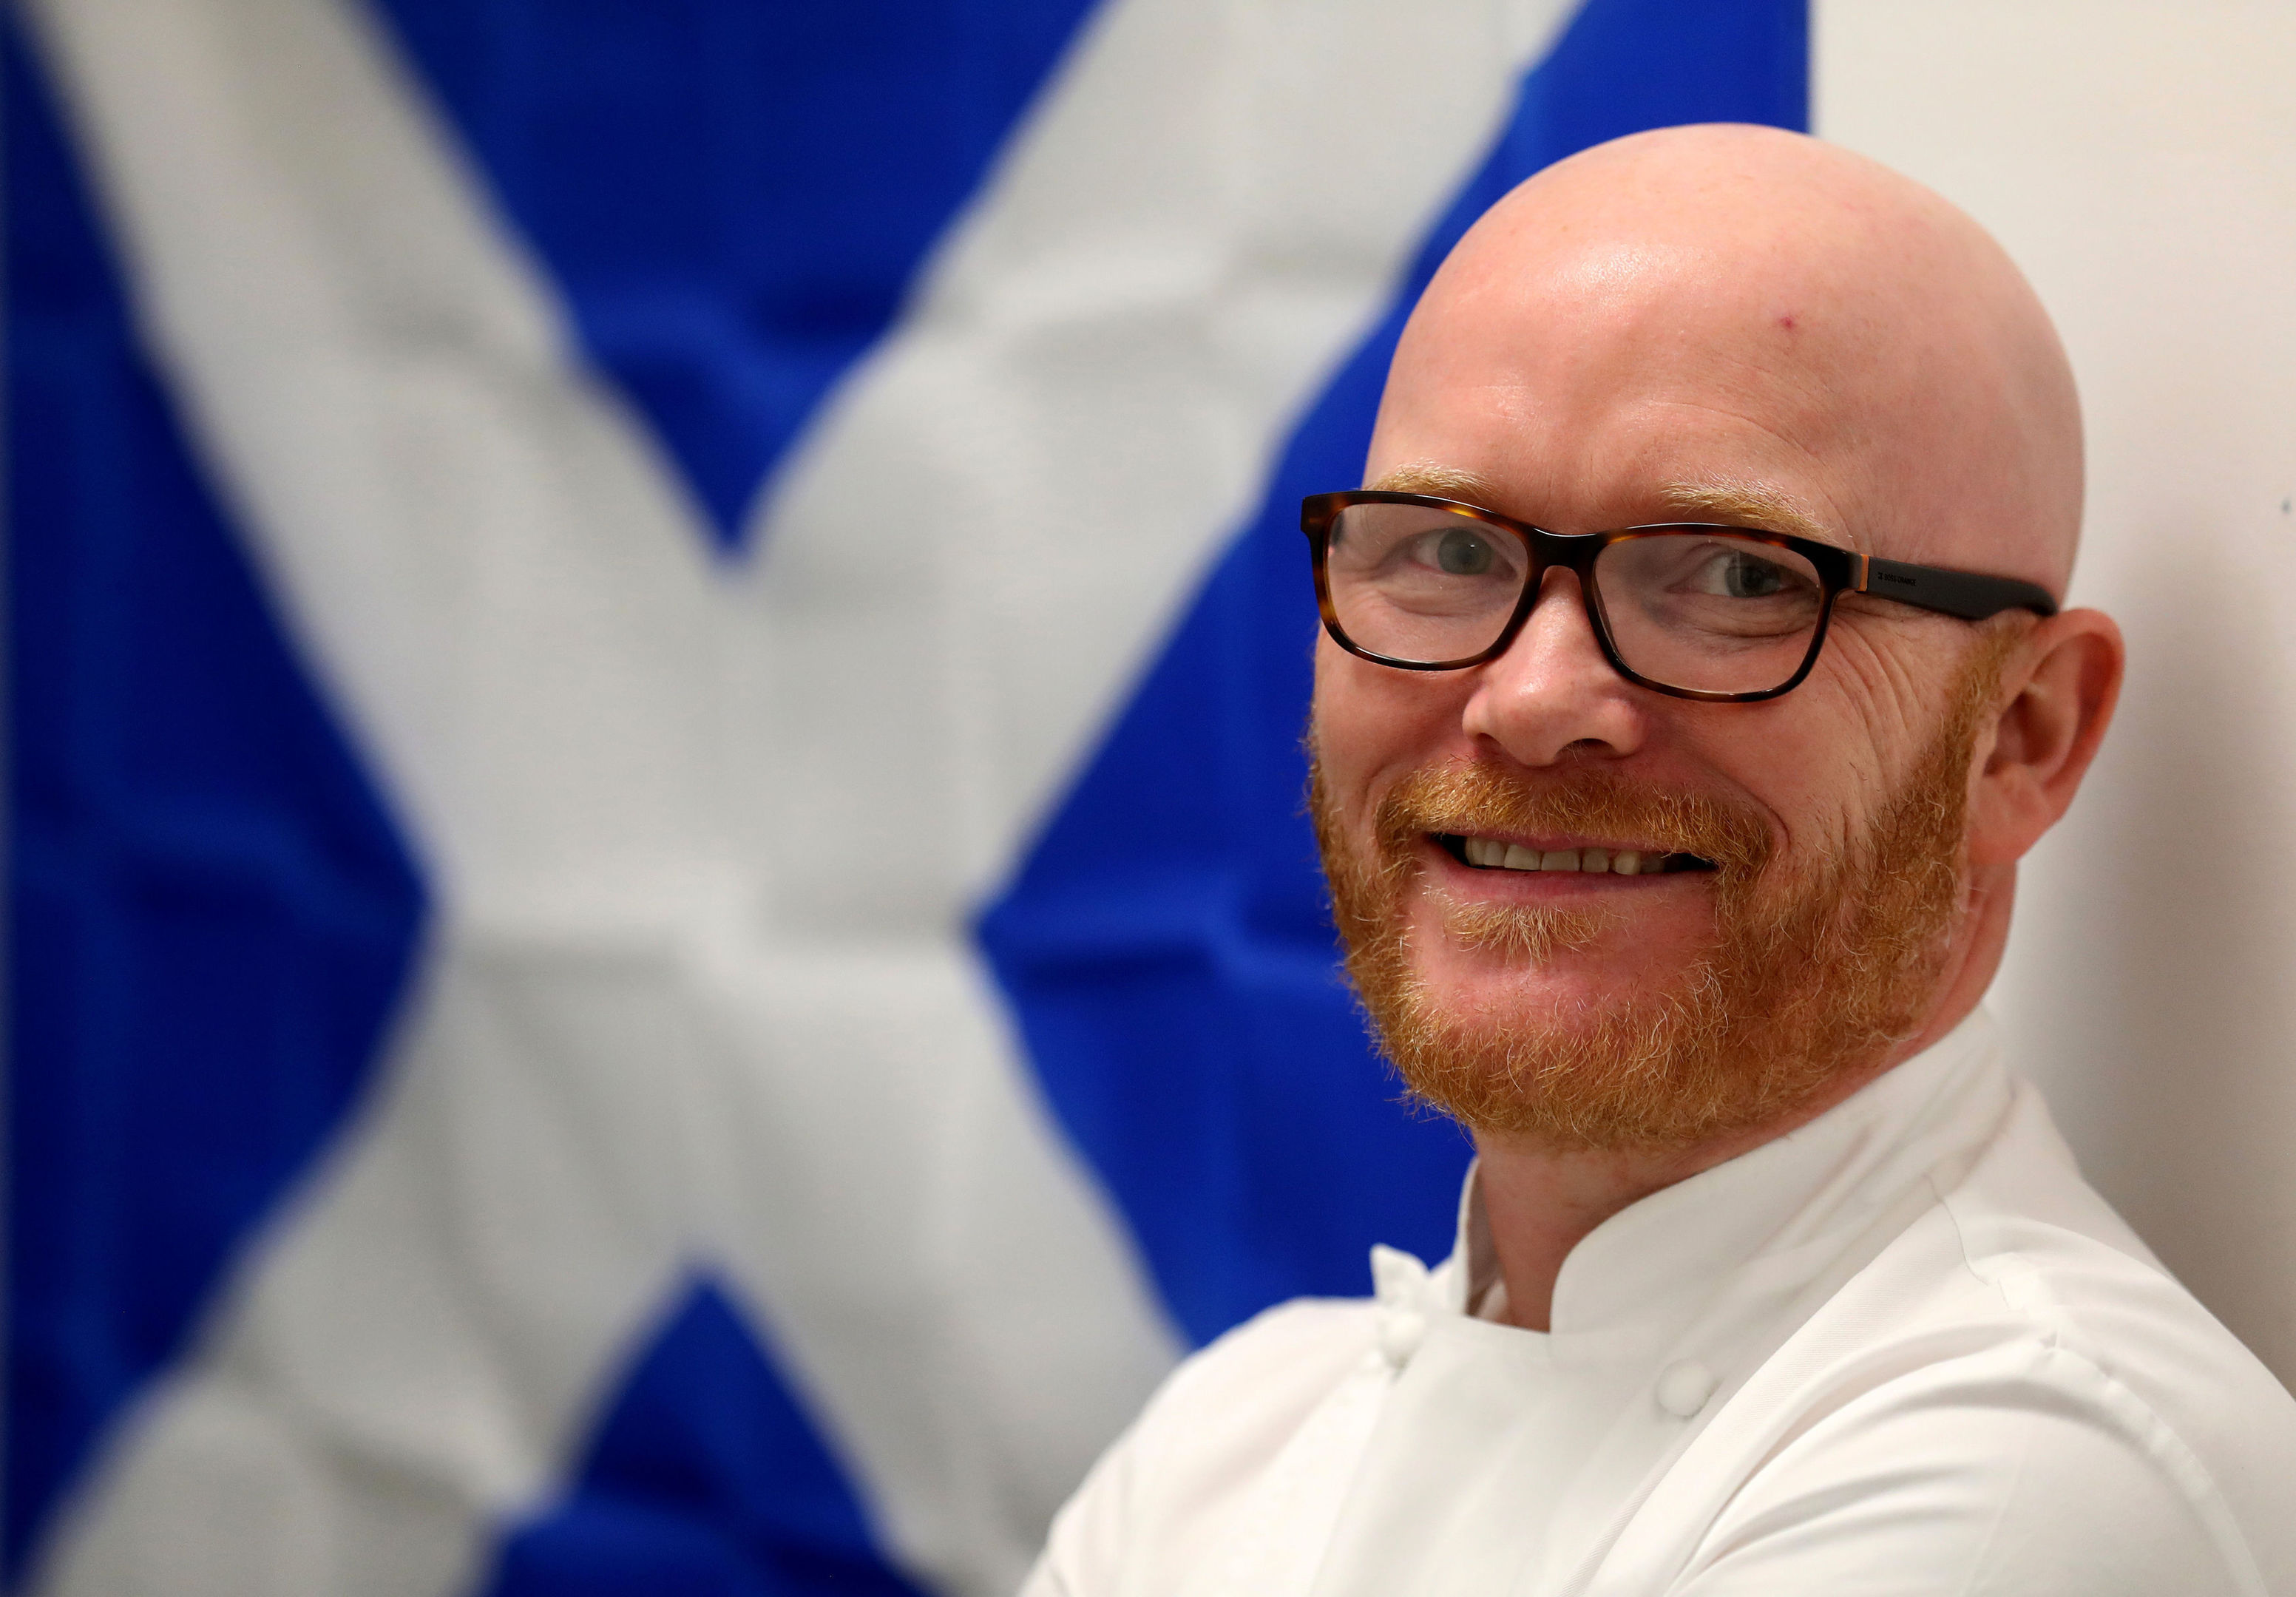 Gary Maclean, who has been named Scotland's first National Chef by the Scottish Government. (Andrew Milligan/PA Wire)